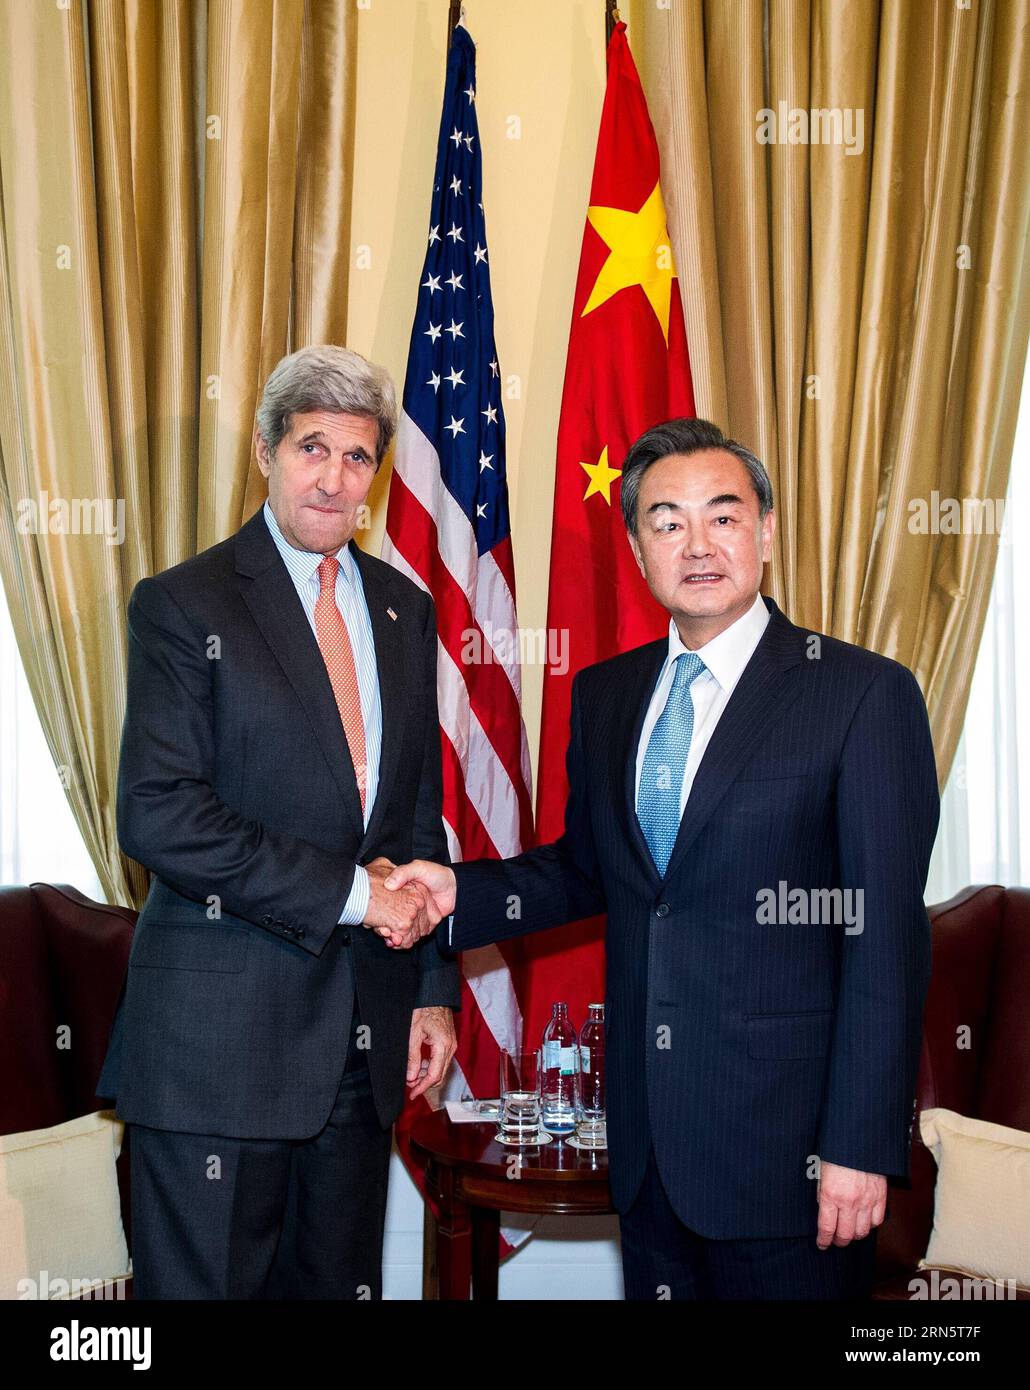 Chinese Foreign Minister Wang Yi(R) meets with U.S. Secretary of State John Kerry during the ongoing nuclear negotiation in Vienna, Austria, on July 2, 2015. ) AUSTRIA-VIENNA-CHINA-FM-U.S.-SECRETARY OF STATE-MEETING QianxYi PUBLICATIONxNOTxINxCHN   Chinese Foreign Ministers Wang Yi r Meets With U S Secretary of State John Kerry during The ongoing Nuclear Negotiation in Vienna Austria ON July 2 2015 Austria Vienna China FM U S Secretary of State Meeting QianxYi PUBLICATIONxNOTxINxCHN Stock Photo